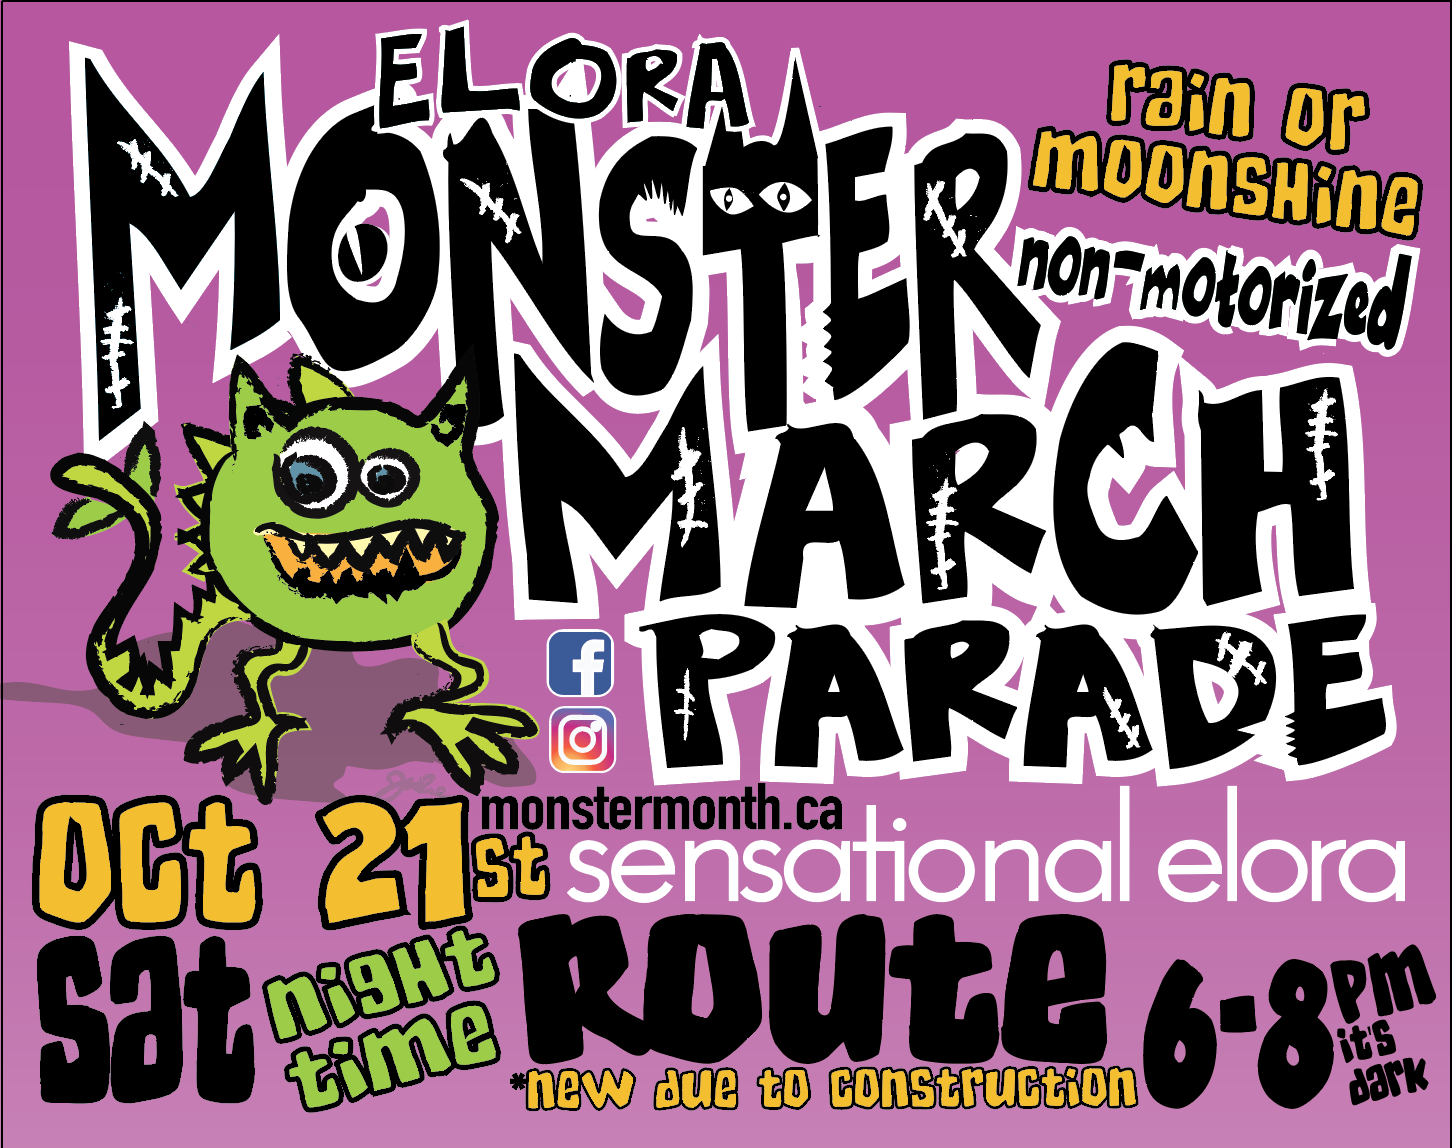 Monster March Parade. Rain or shine. Non-motorized. October 21, 2023. 6-8pm.